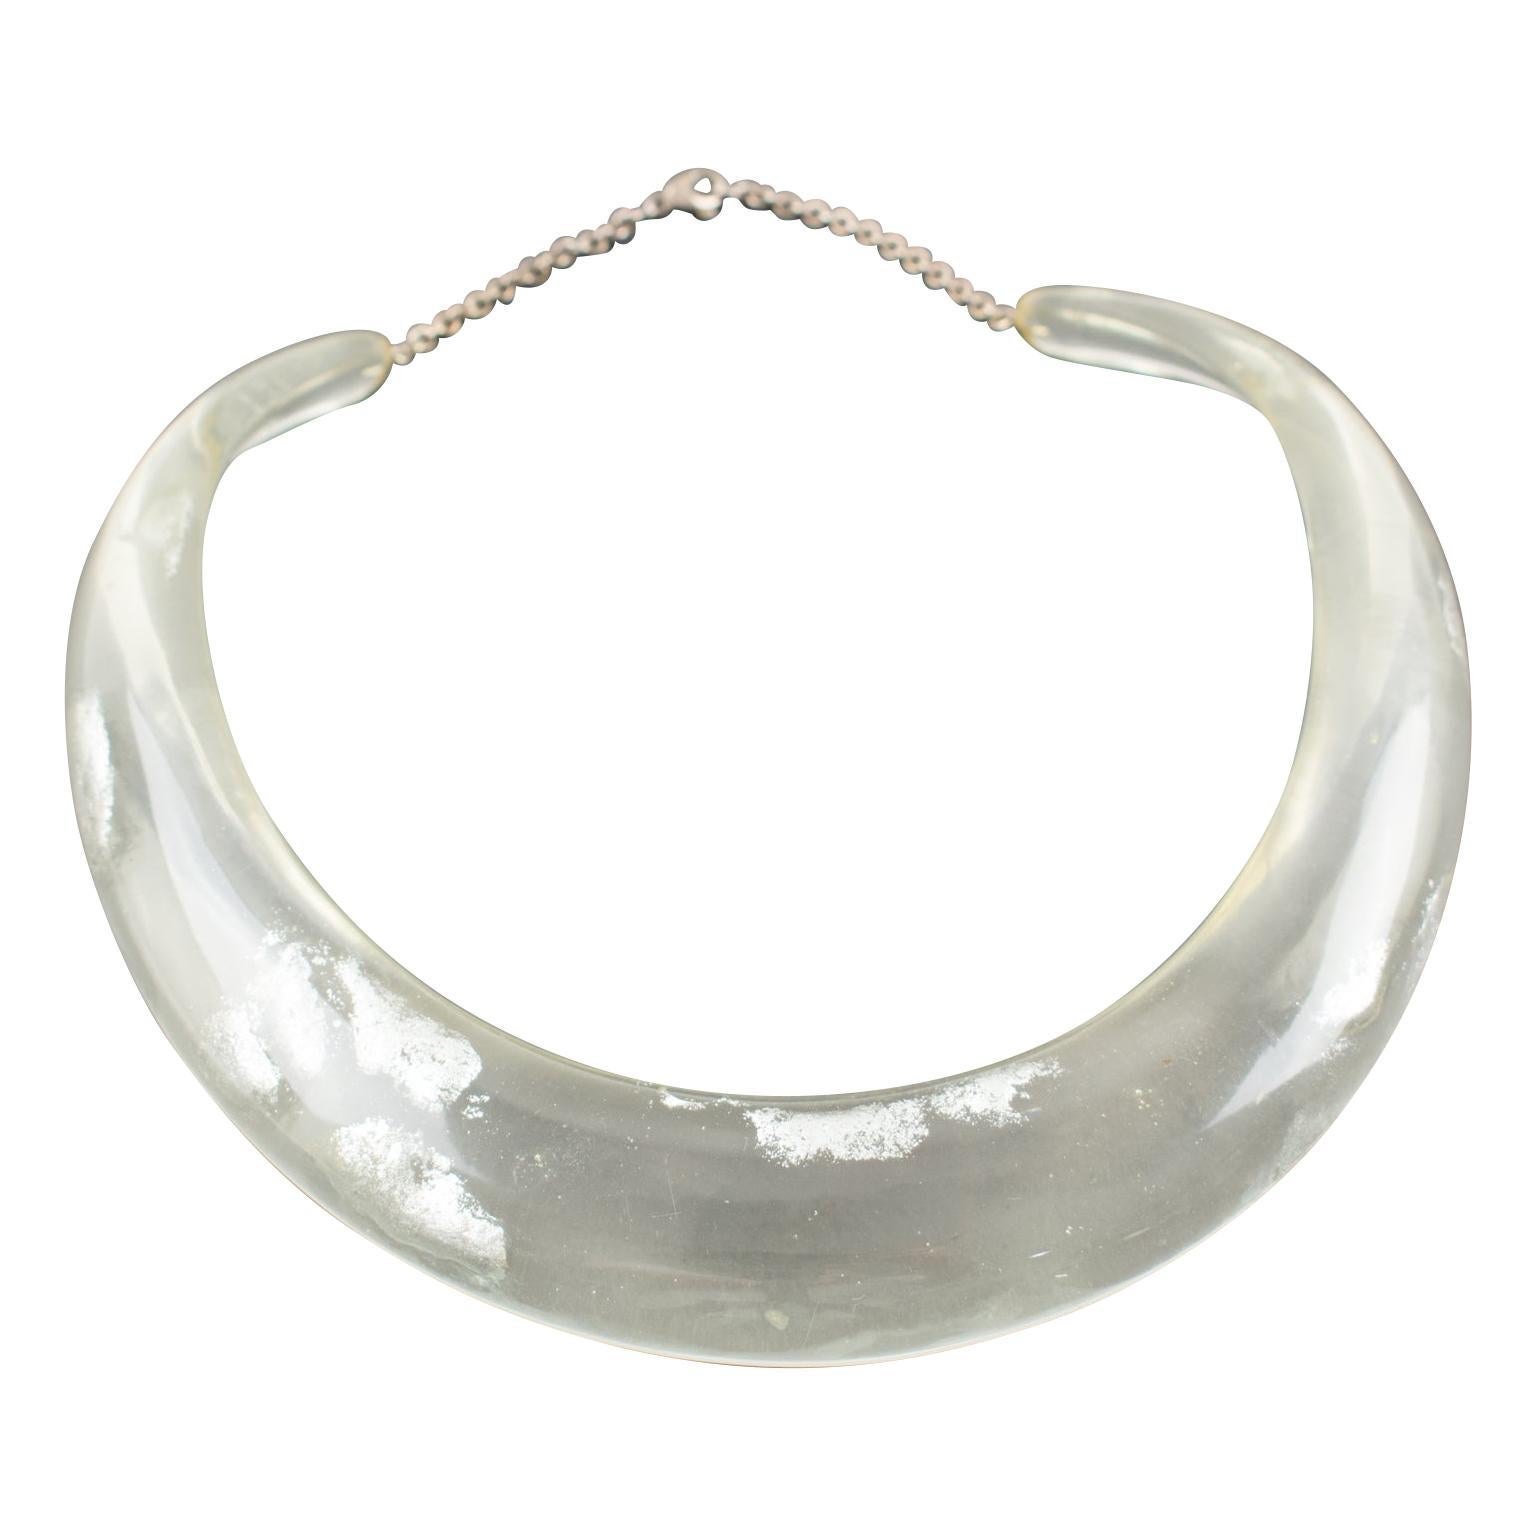 Transparent Resin Rigid Collar Necklace with Silver Flakes Inclusions For Sale